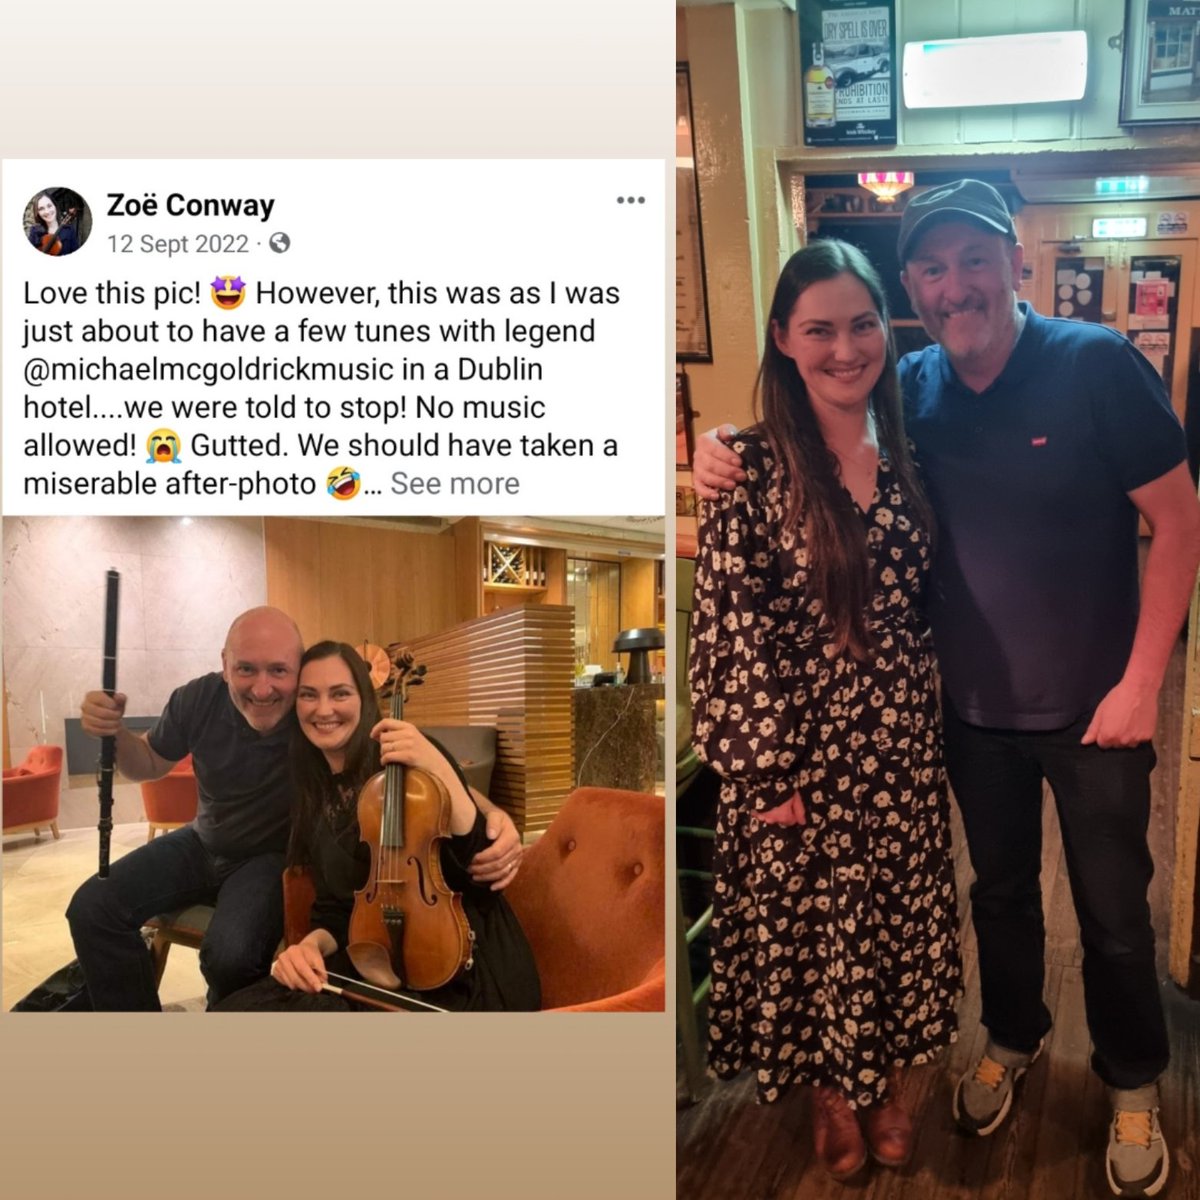 Just thought you might like know that myself and Michael Mc Goldrick FINALLY got to have a session together! (Waiting since that night when a Dublin hotel wouldn't let us 🙄) And it was EPIC! At Matt Molloy's Pub of course. And we played Waterman's just because 🤣 💗💗💗